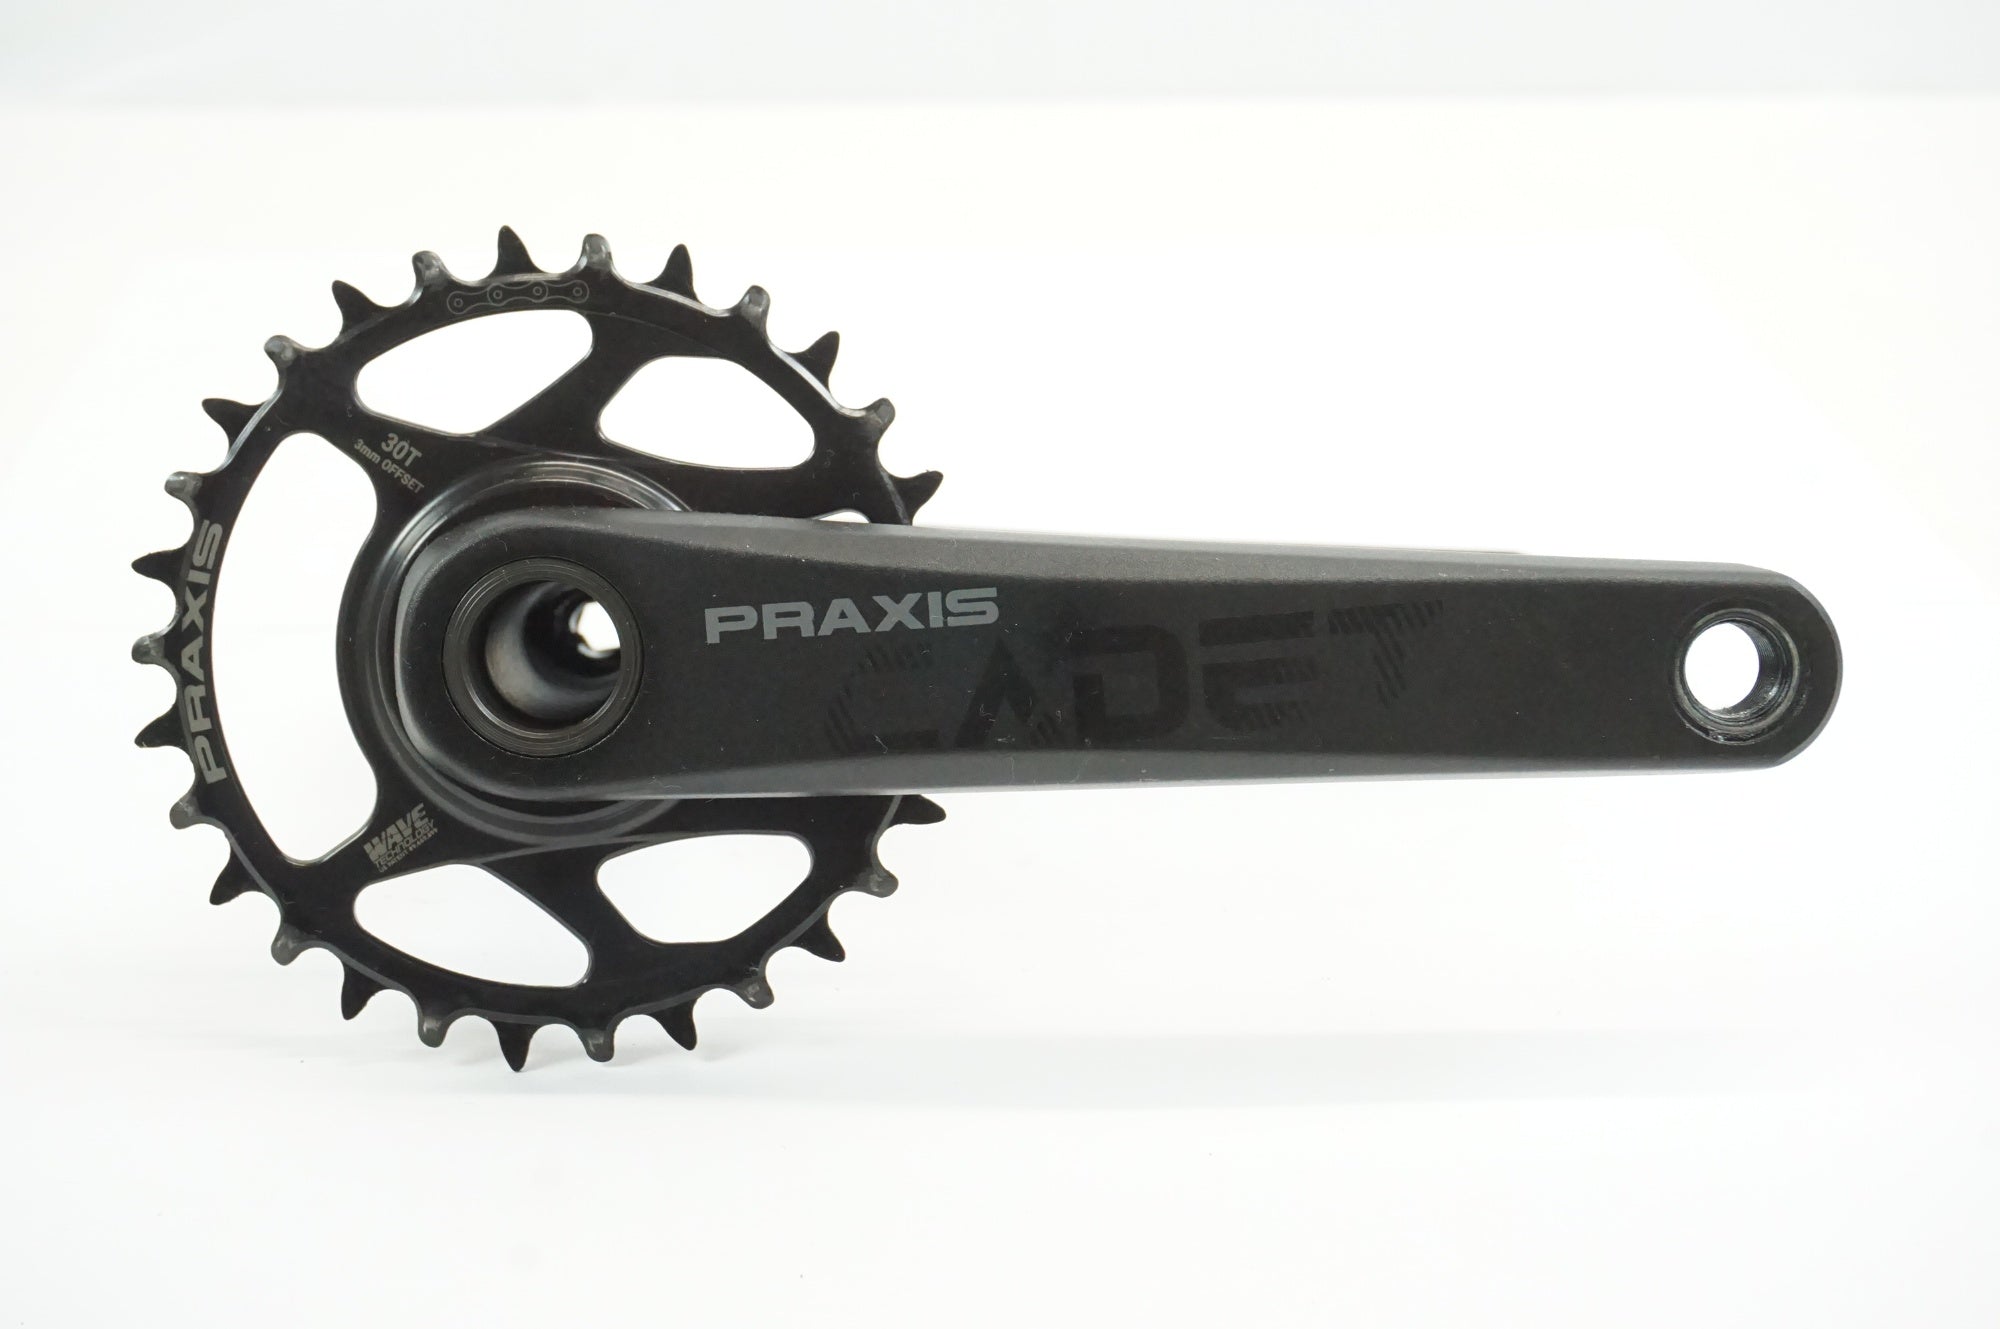 PRAXIS WORKS 「プラクシスワークス」 CADET M24 30T 170mm クランク / 宇都宮店